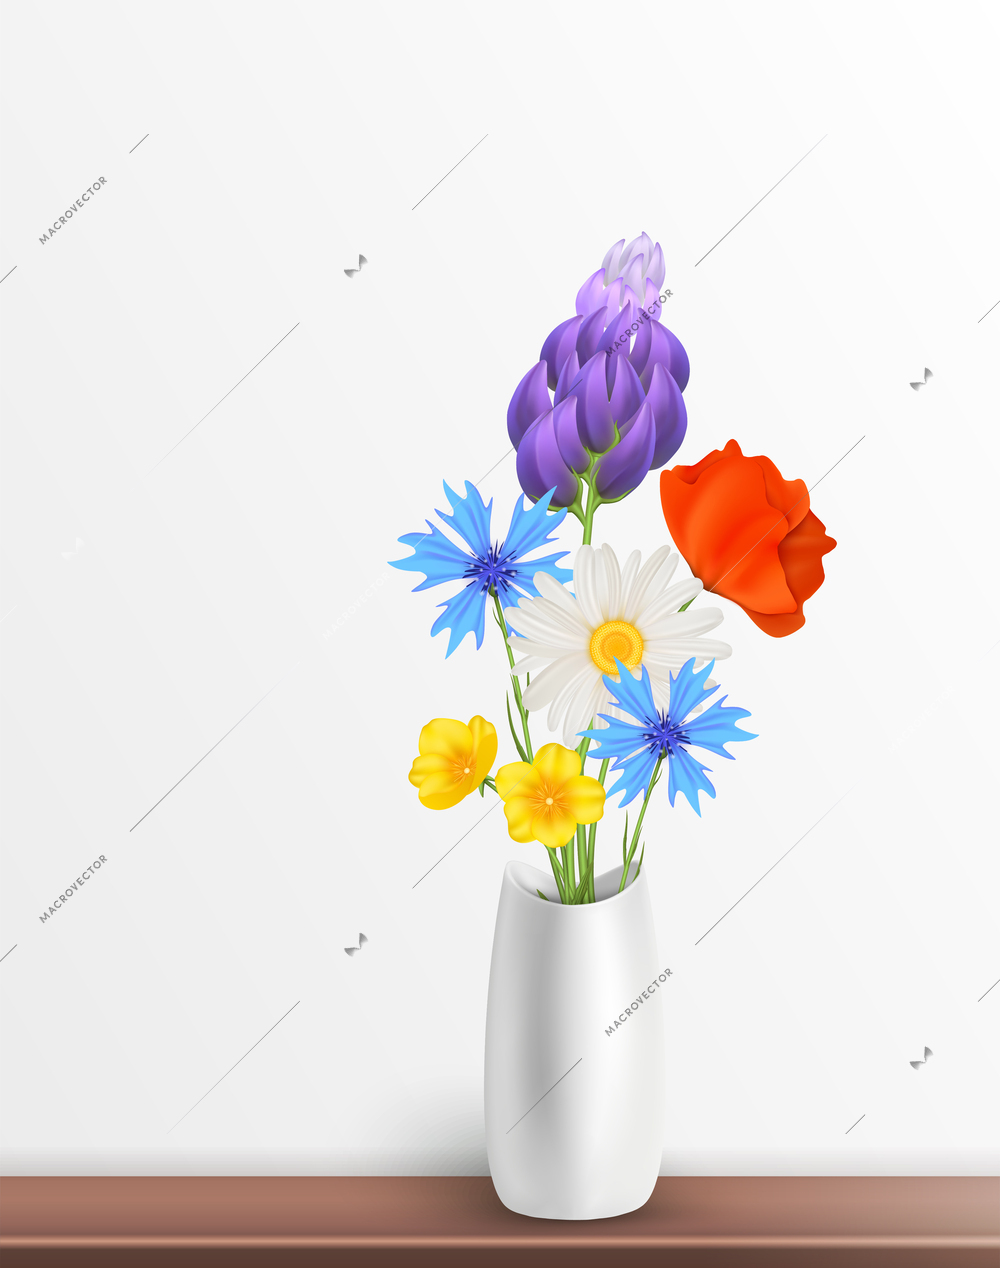 Spring flowers realstic background with poppy vector illustration